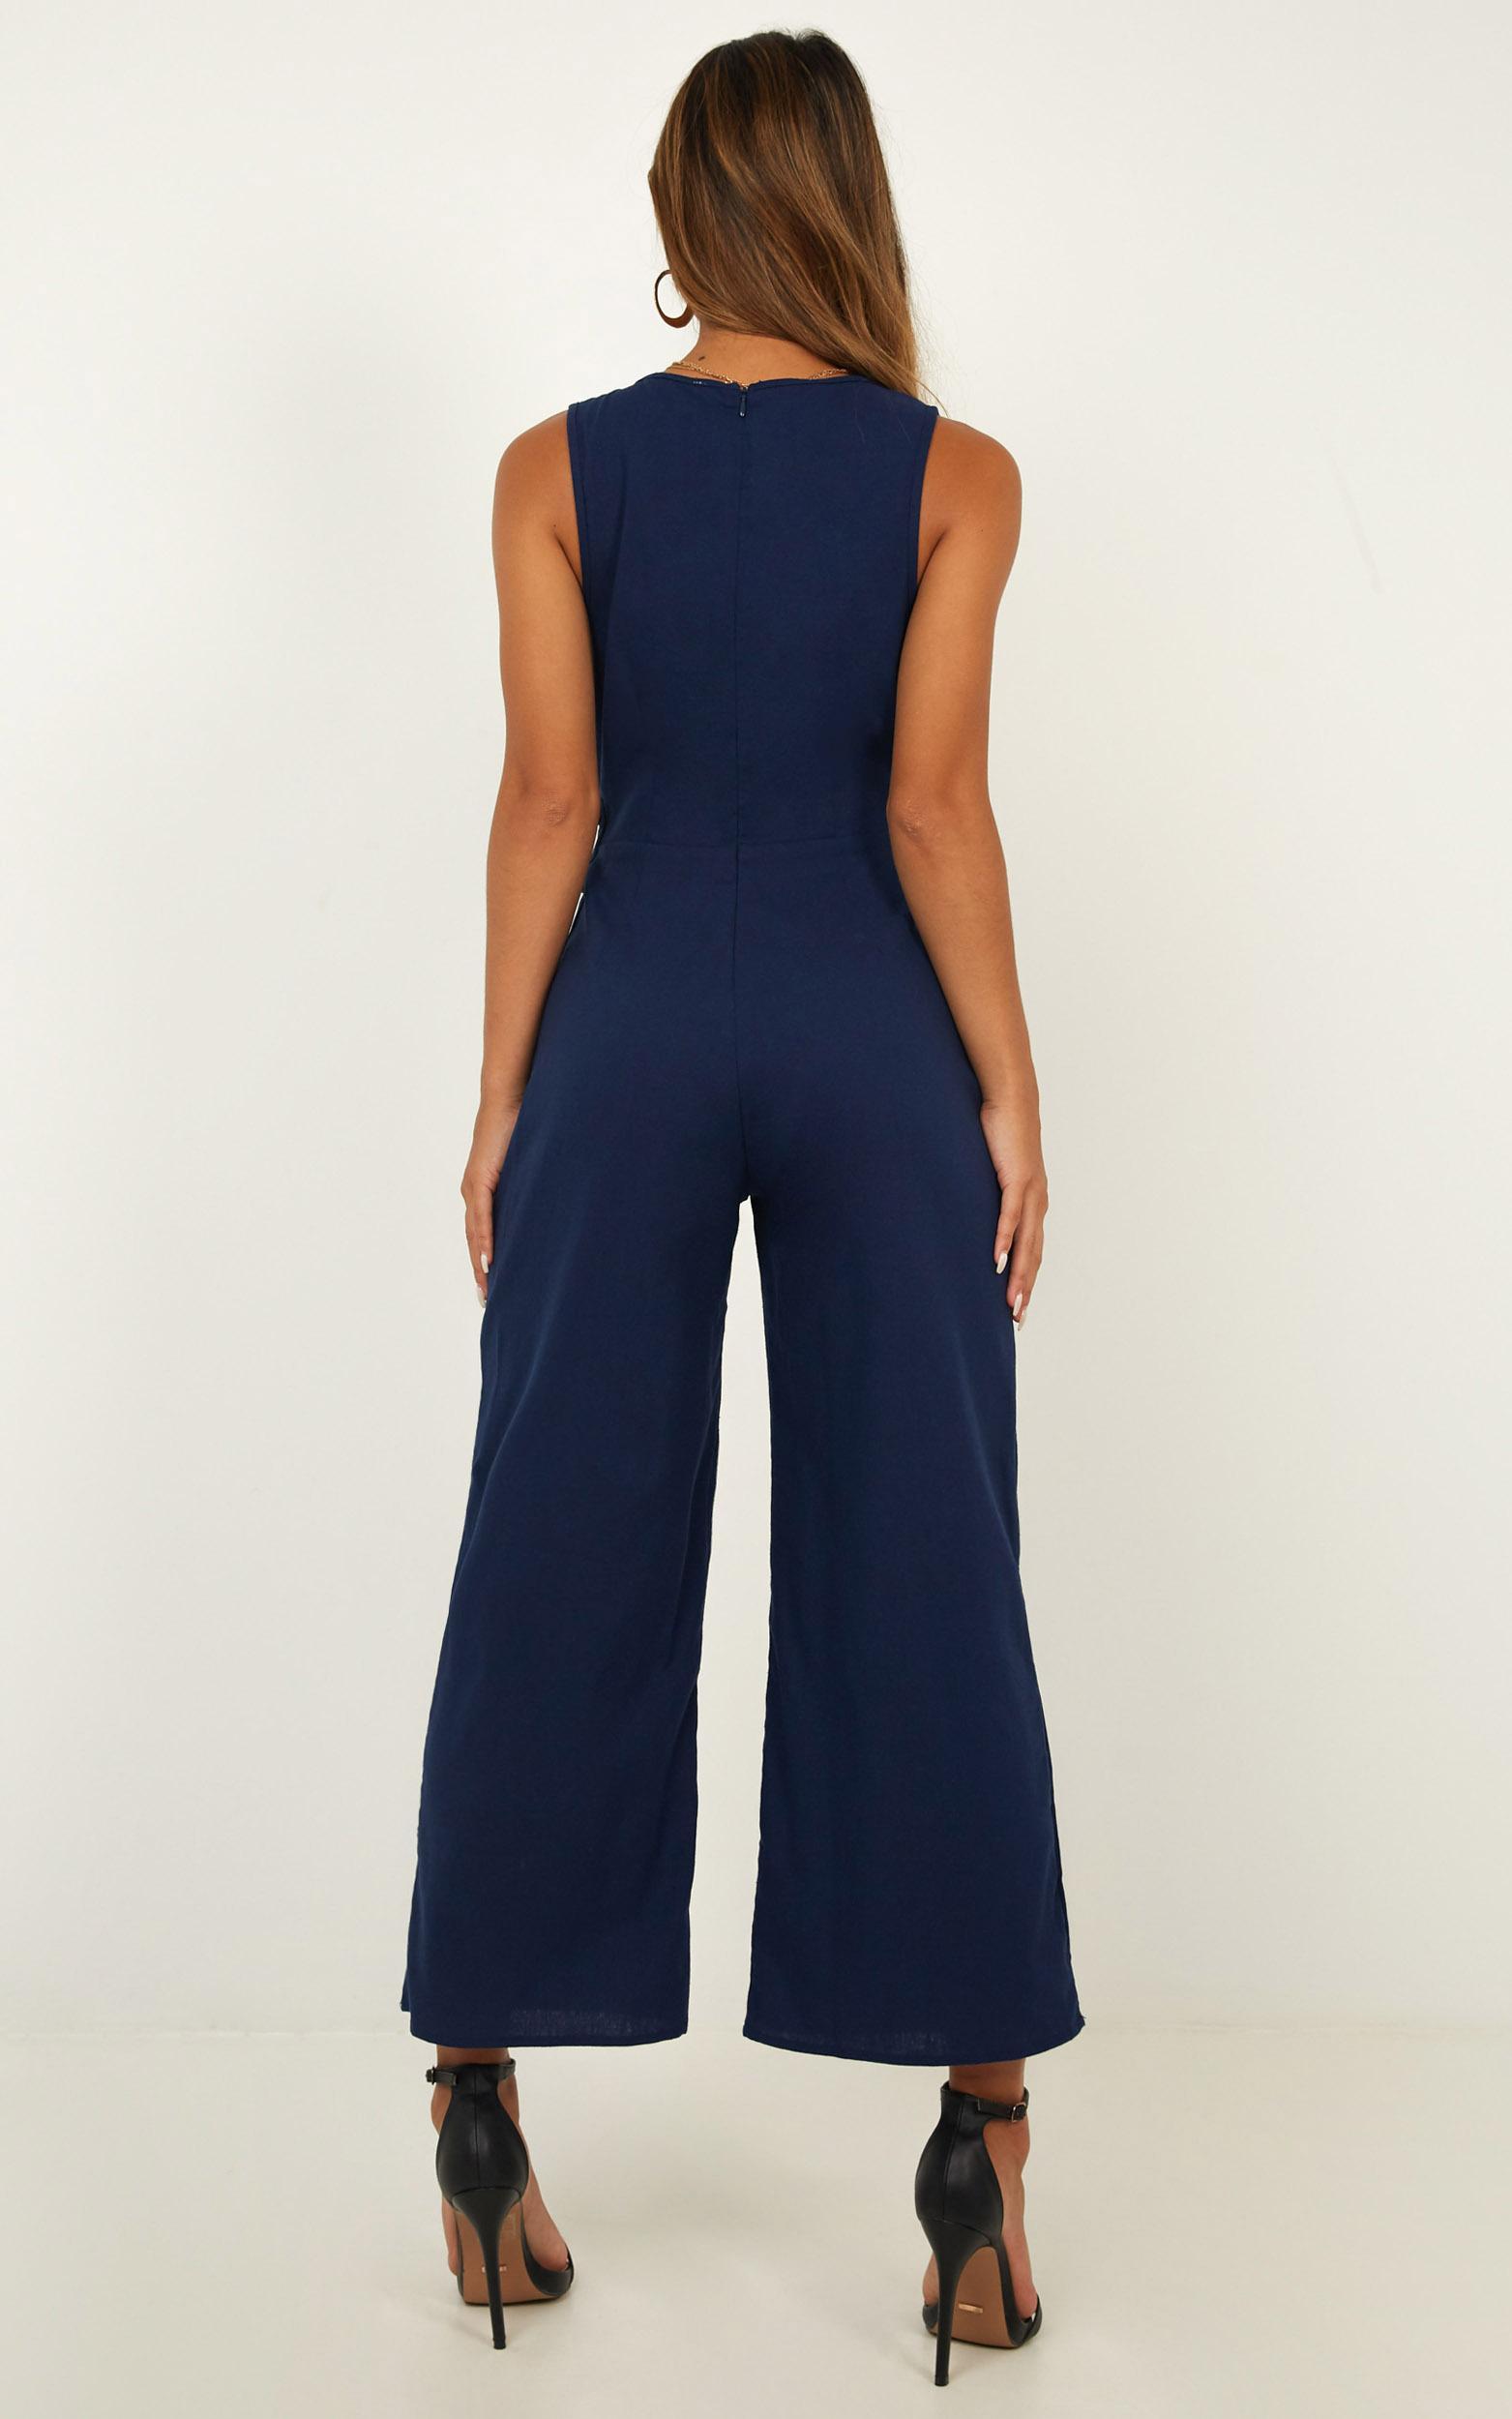 Clear As Crystal Jumpsuit In Navy Linen Look | Showpo